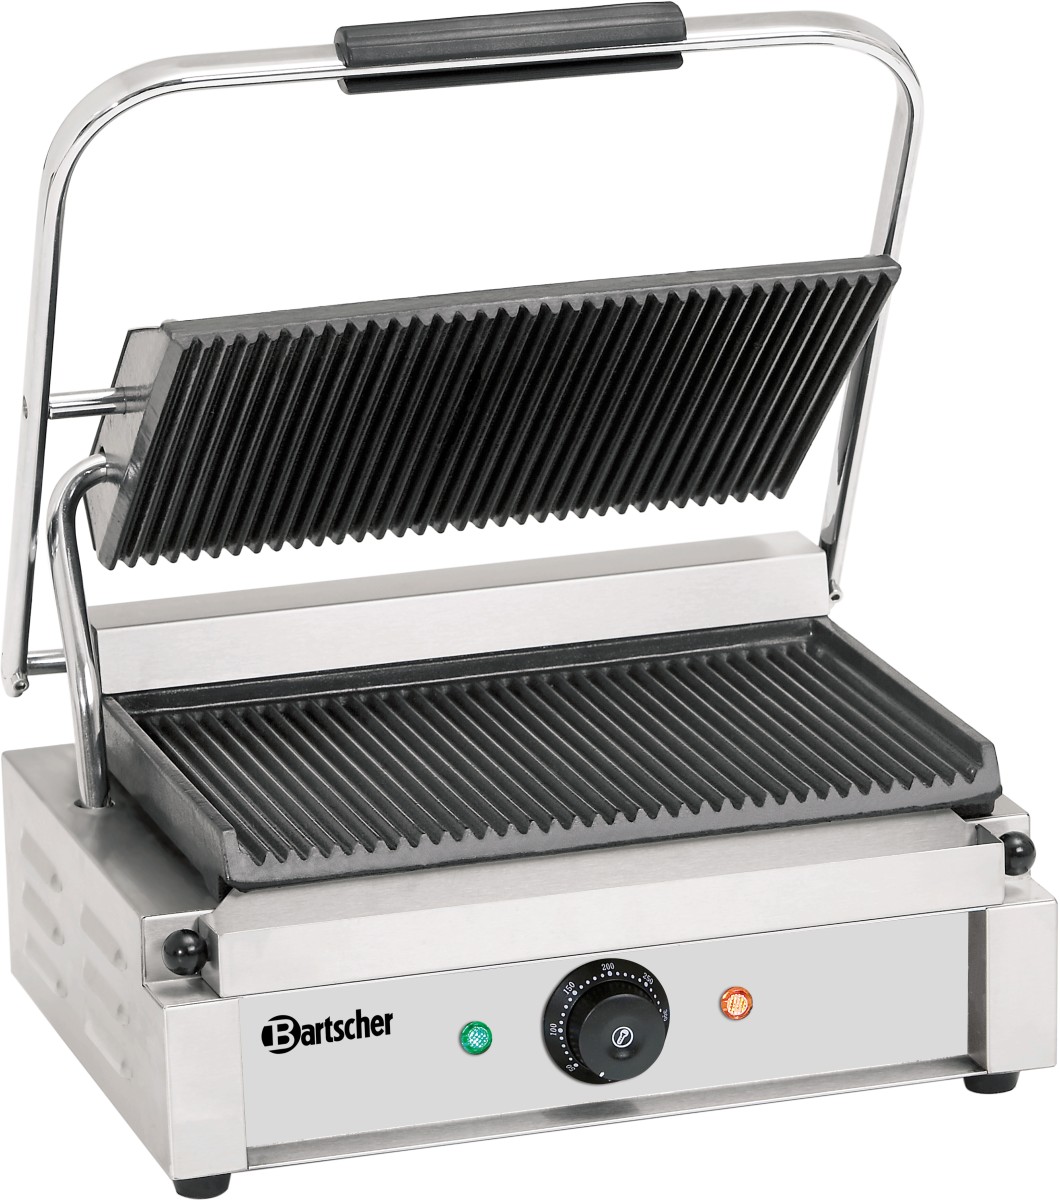  Bartscher Contact grill "Panini" 1R 